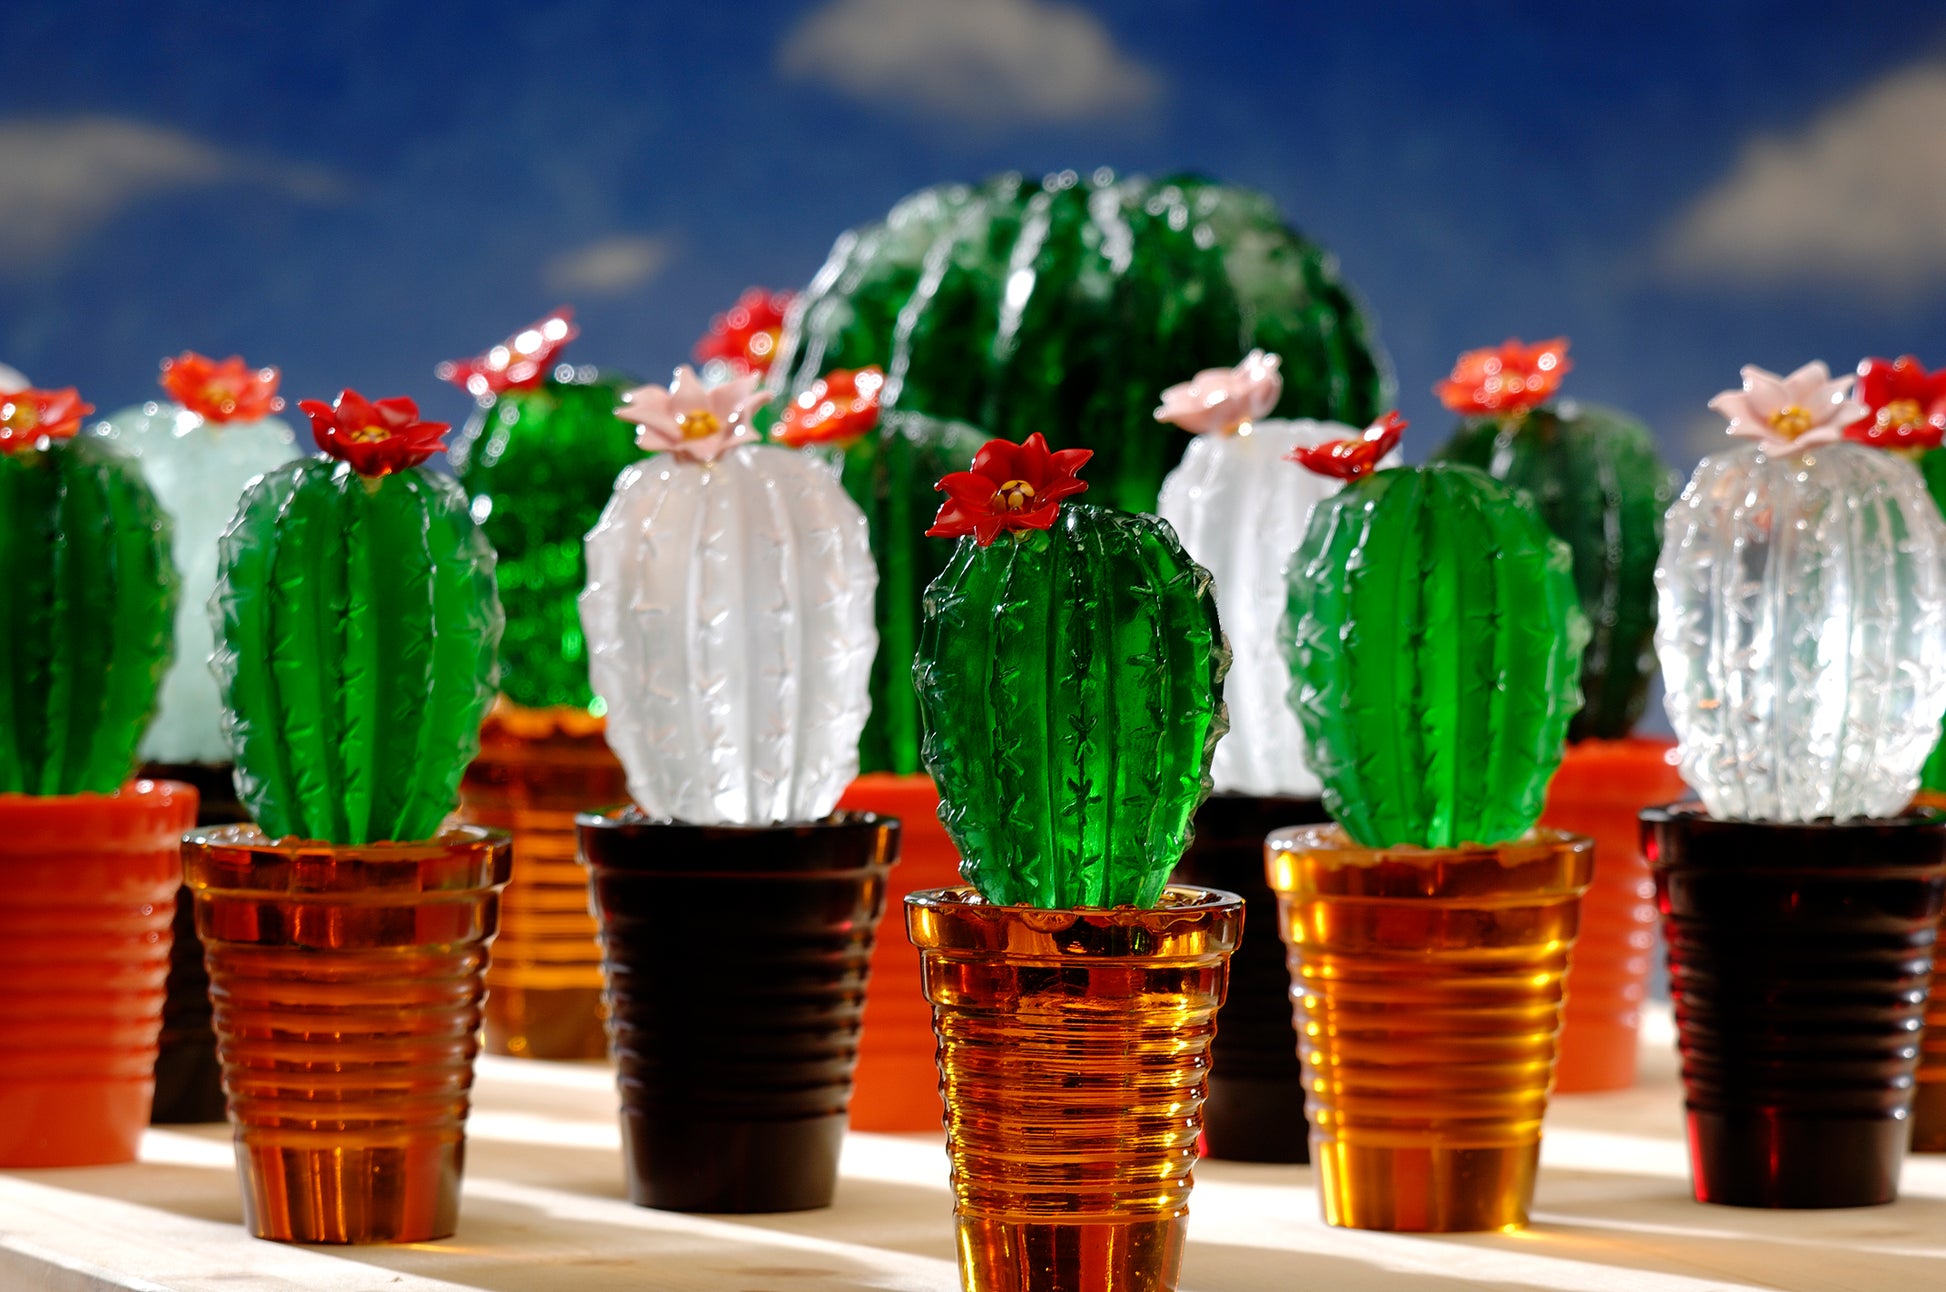 Barrel Cactus Luxury Glass Sculptures Green and White